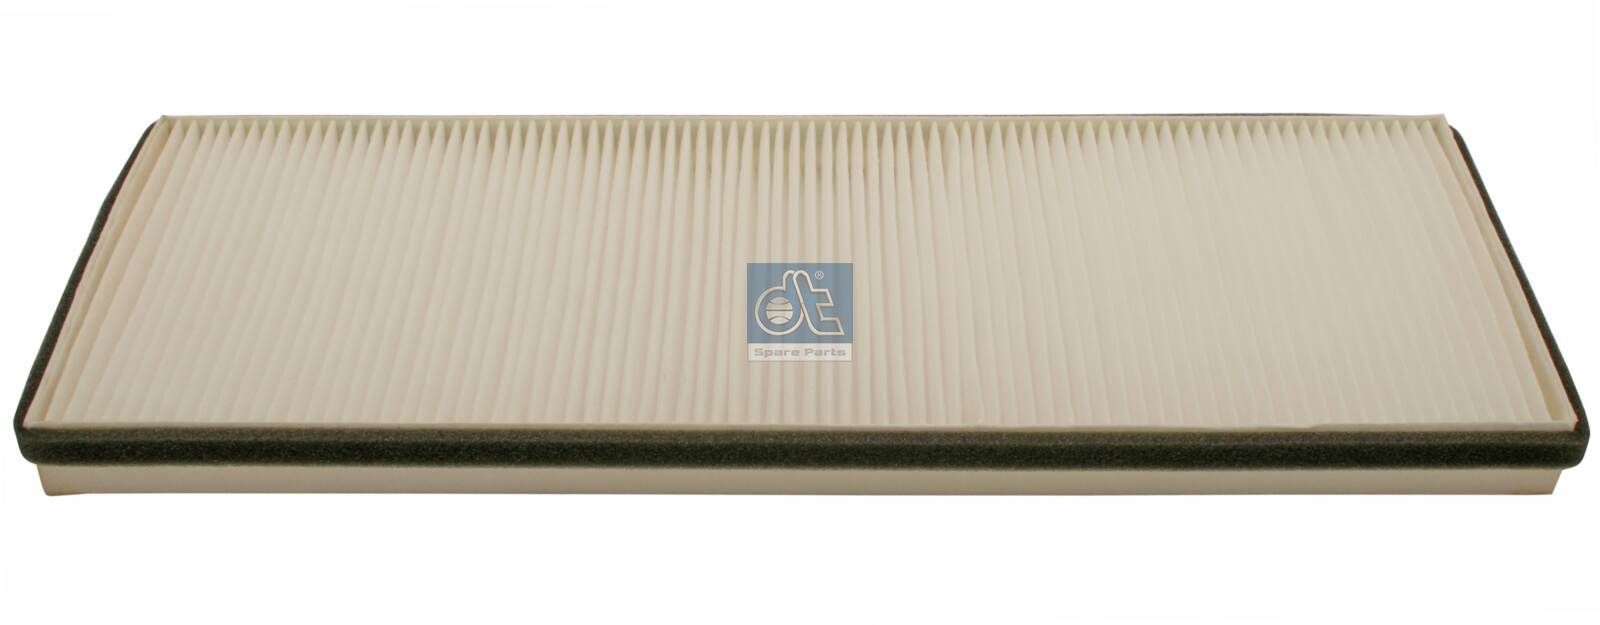 DT Spare Parts Pollen Filter, 425 mm x 165 mm x 25 mm Width: 165mm, Height: 25mm, Length: 425mm Cabin filter 5.62015 buy